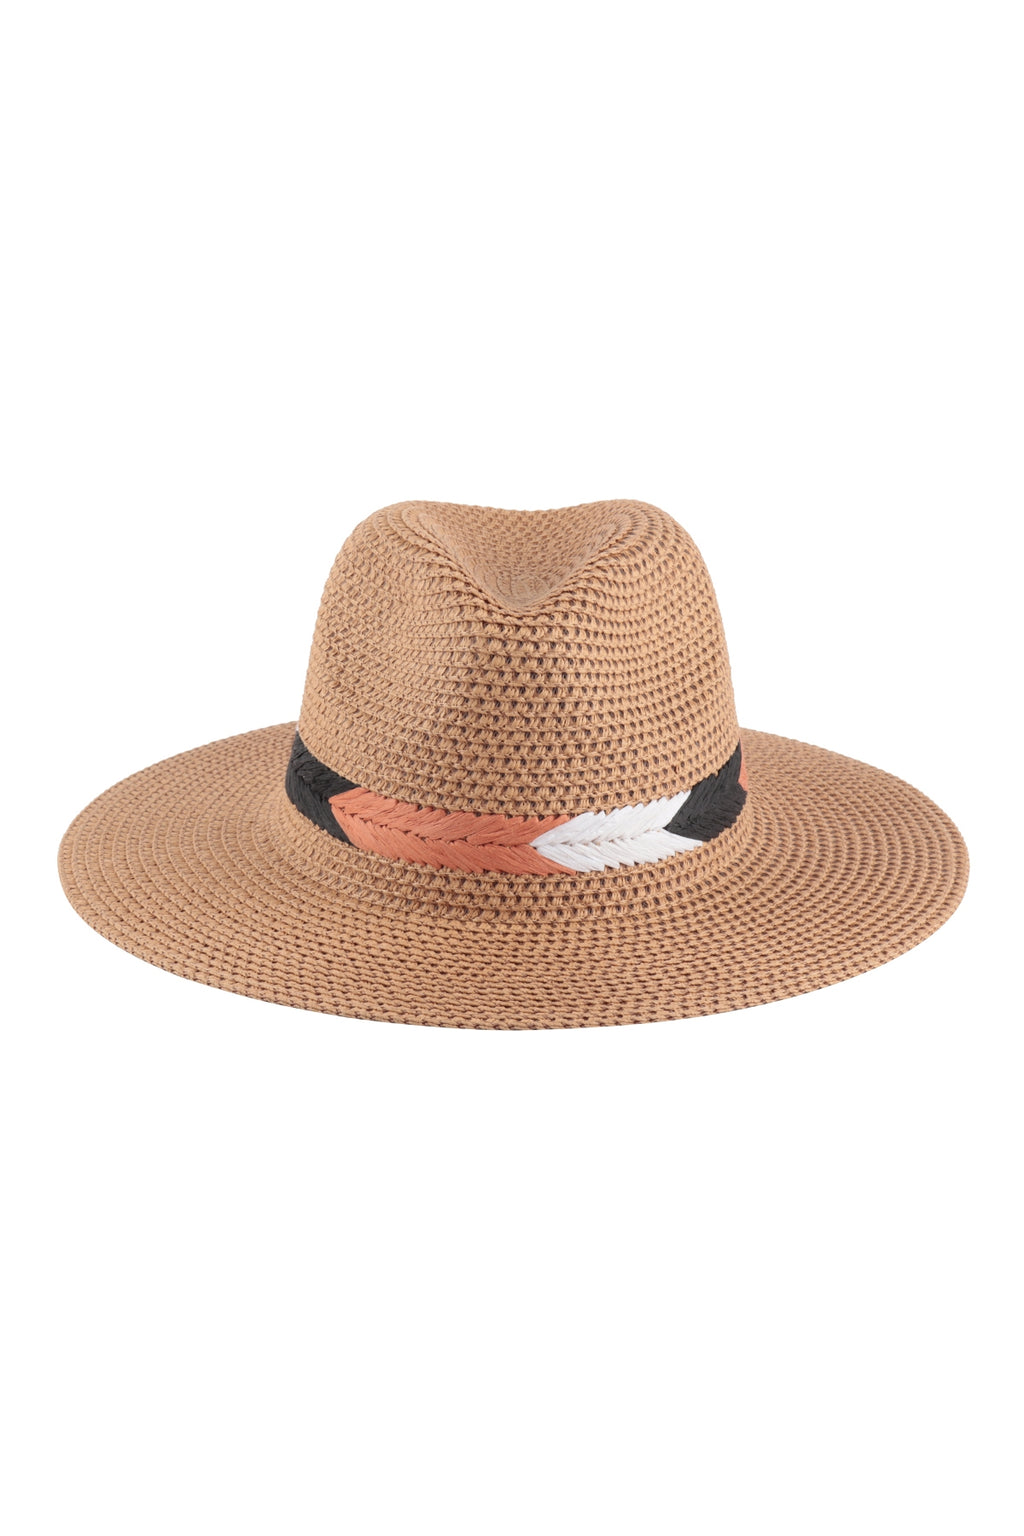 Panama Brim Summer Hat with Braided Stripe Accent Brown - Pack of 6